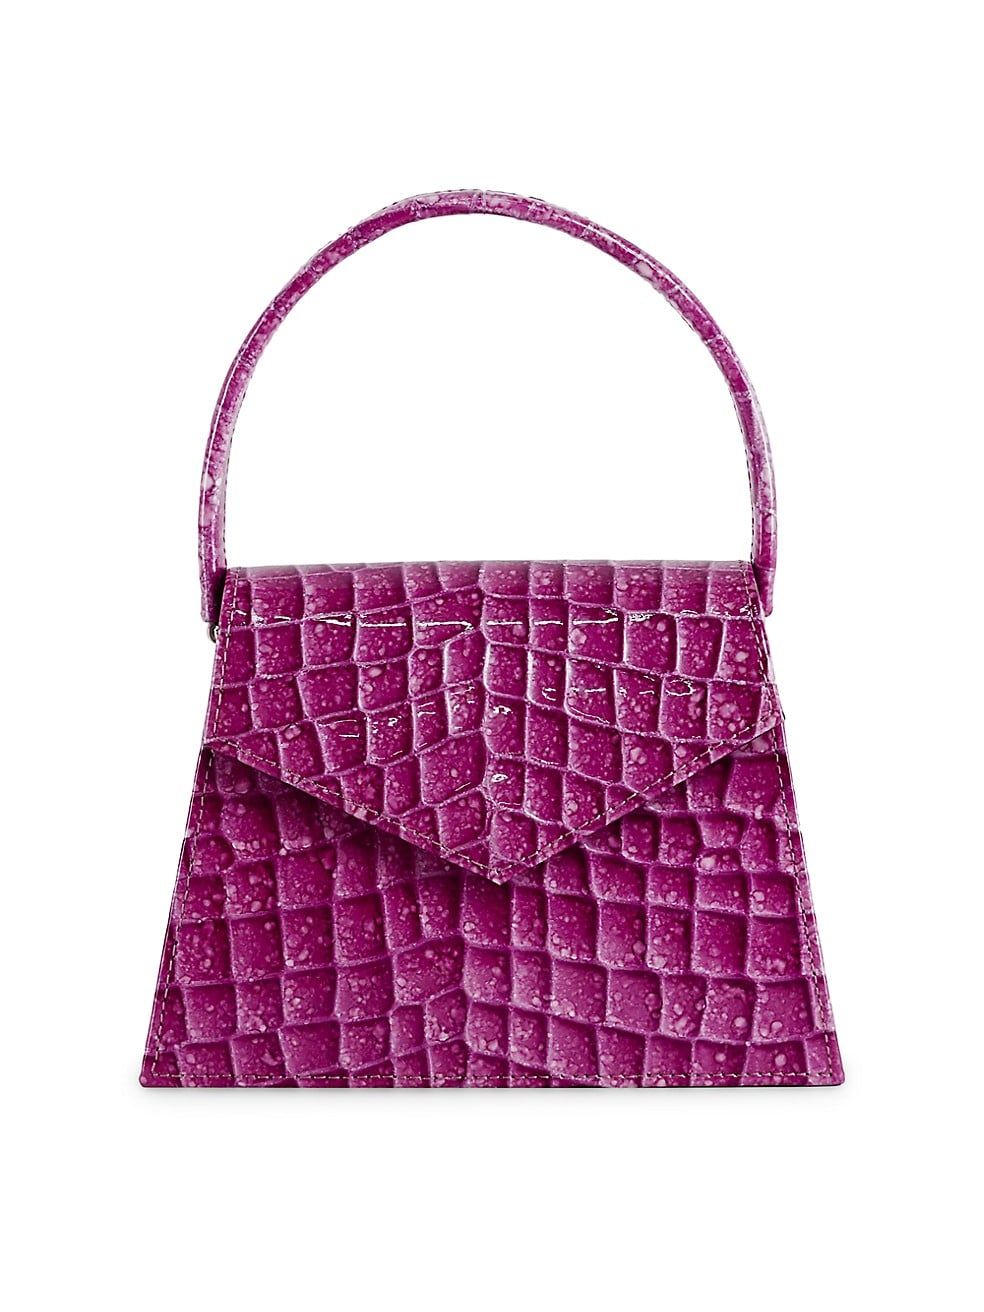 The Zaza Embossed Leather Top Handle Bag | Saks Fifth Avenue